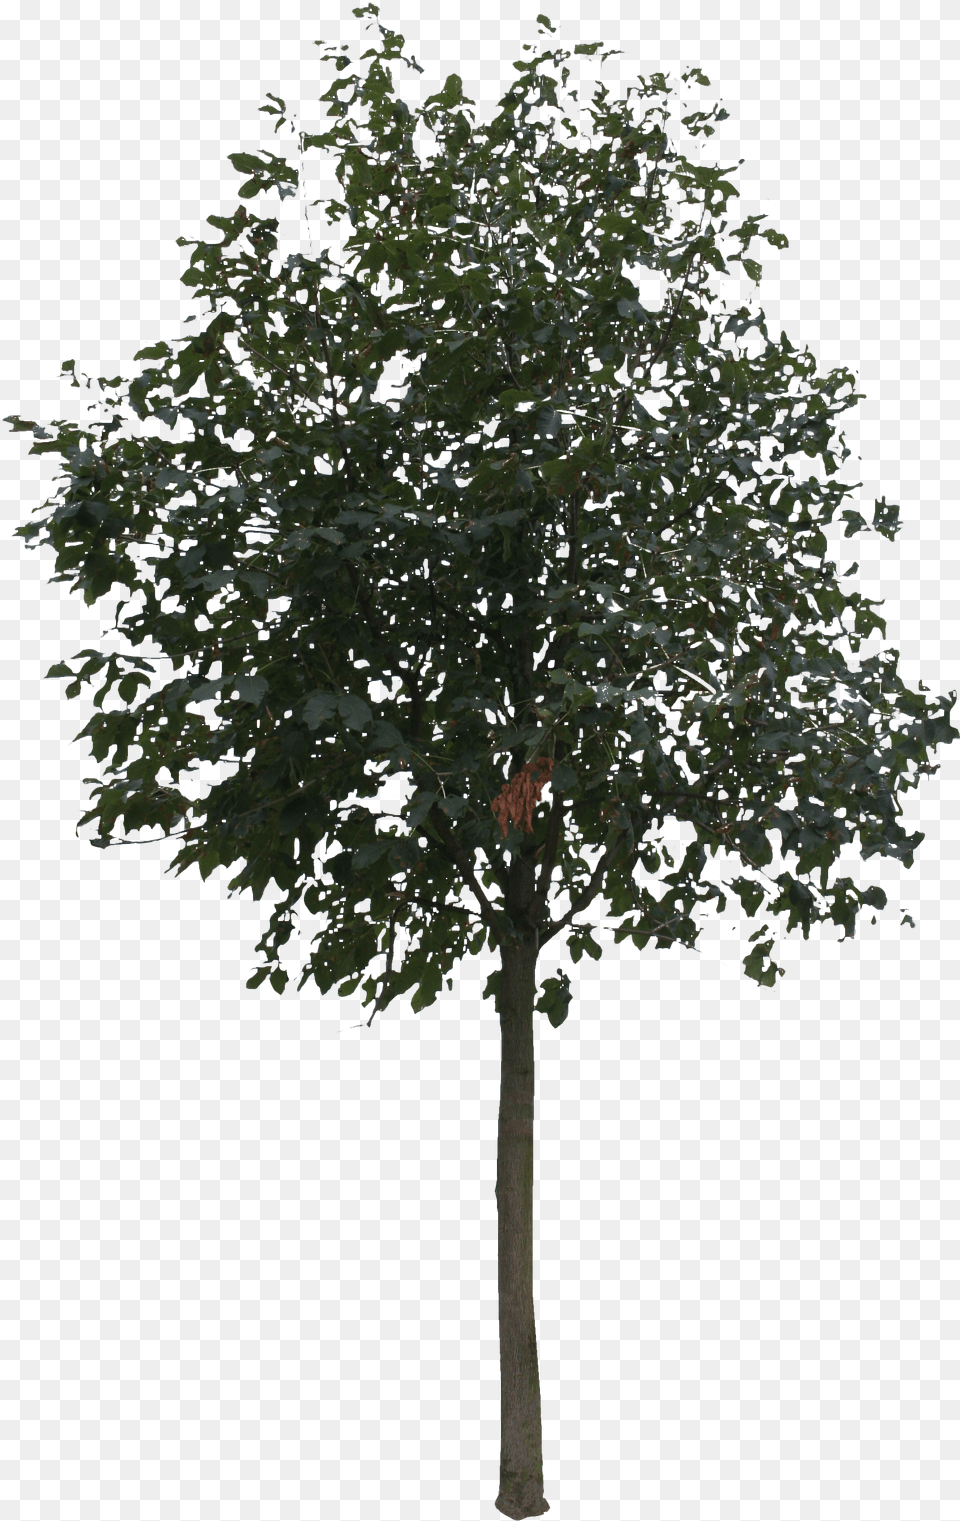 Trees Tree Cut Out, Maple, Oak, Plant, Sycamore Png Image